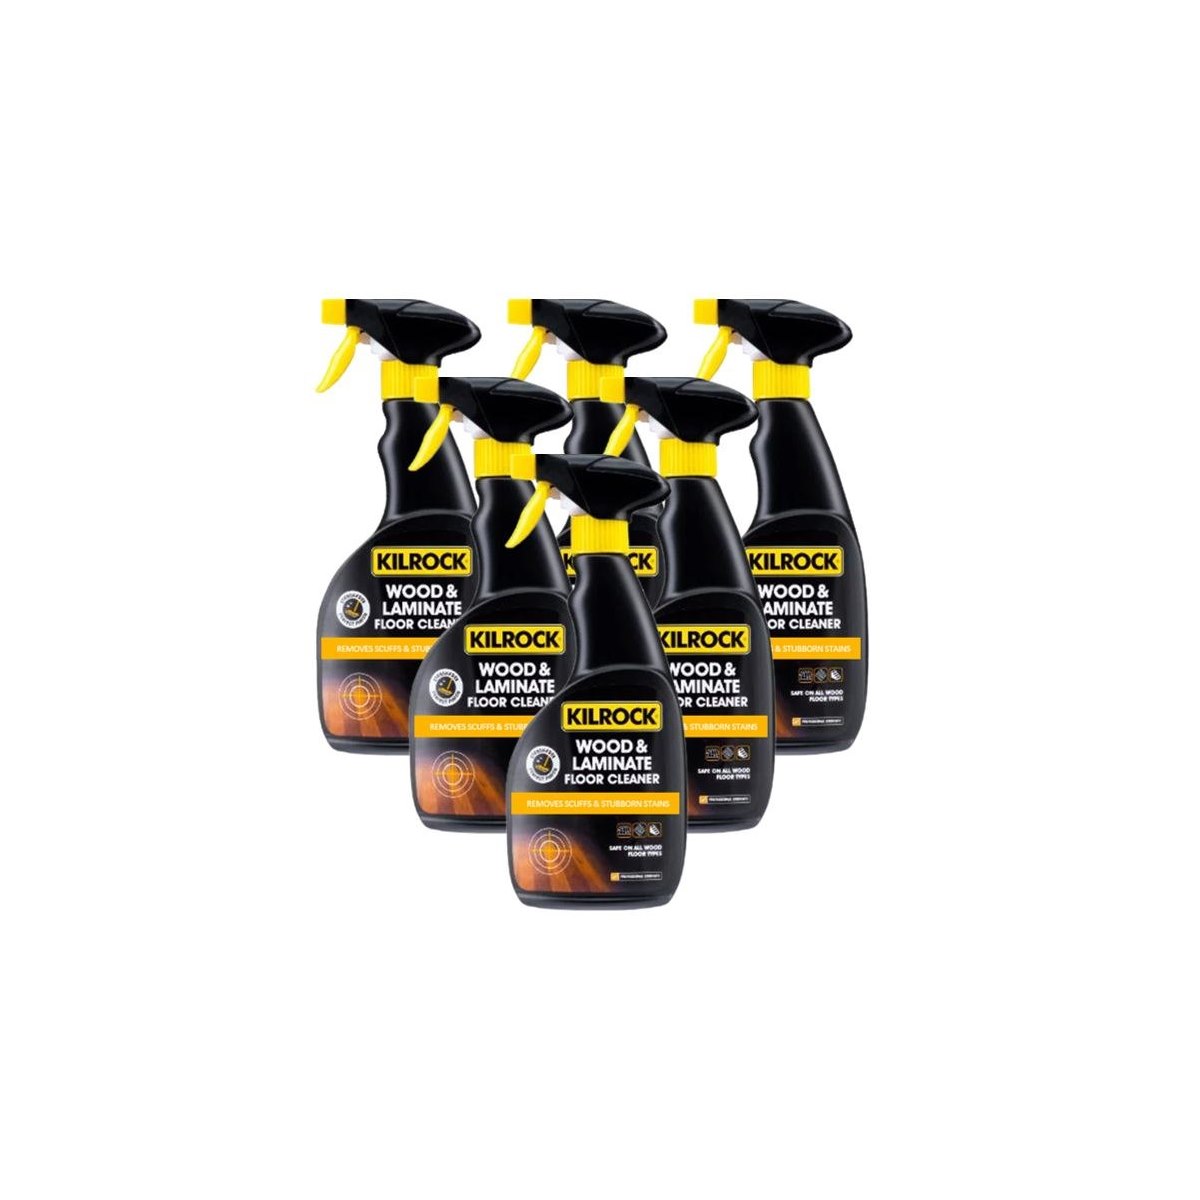 Case of 6 x Kilrock Wood and Laminate Floor Cleaner Spray 500ml